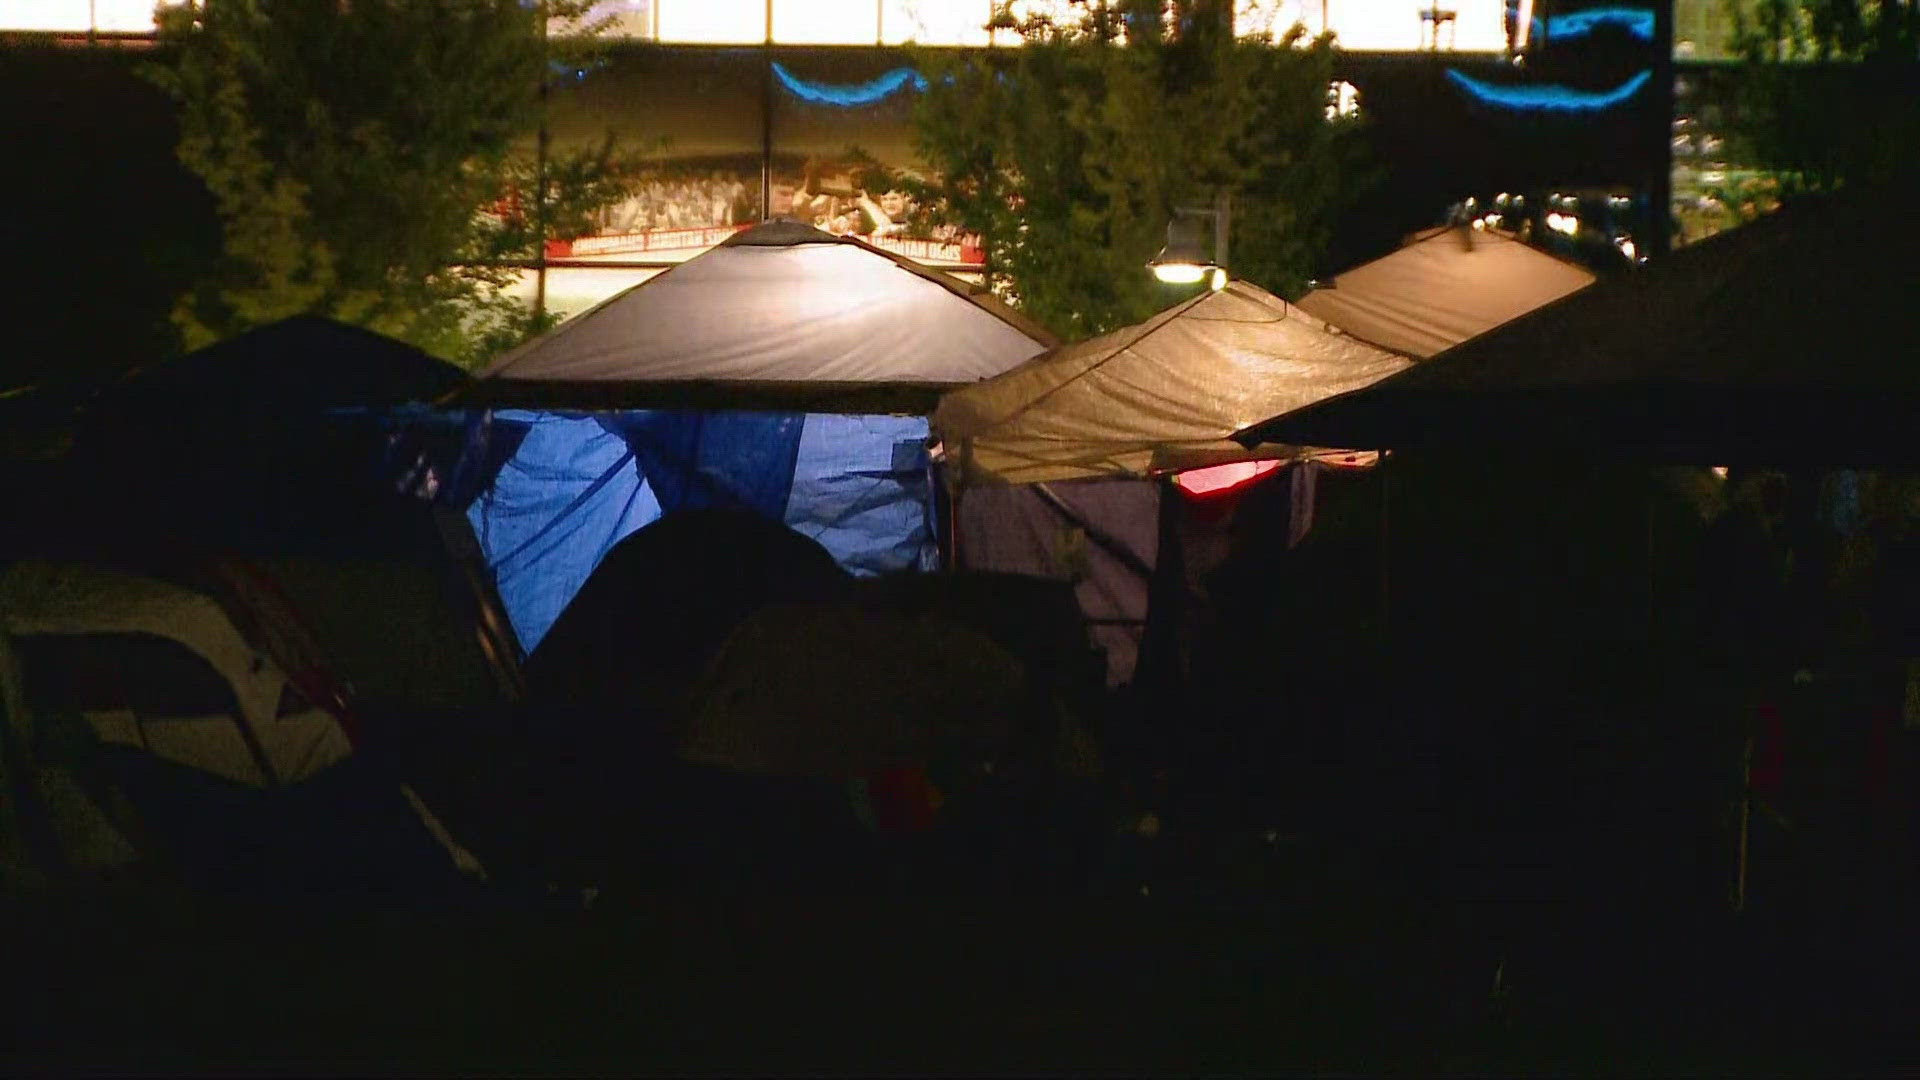 Protesters on Auraria's campus rejected an offer to move the encampment saying they could not be bought off.